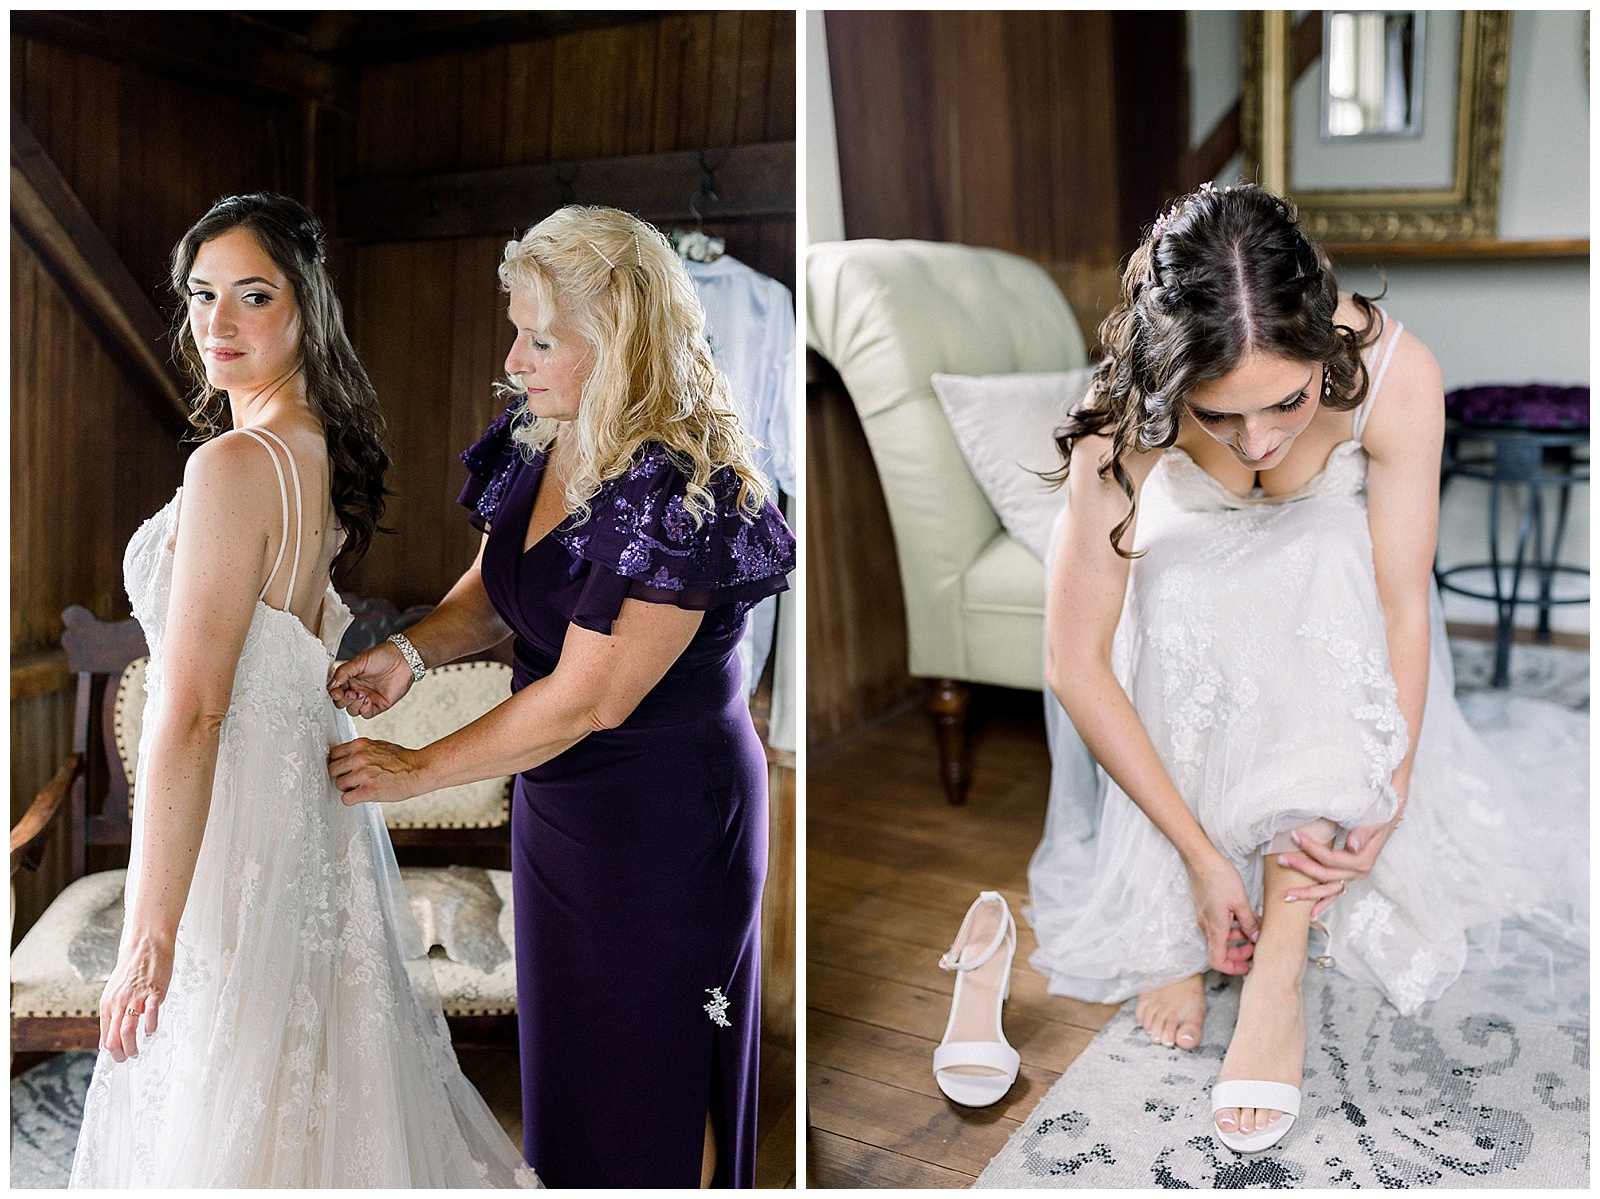 mother of the bride zips her daughter into her wedding dress at lakefield weddings, a modern barn wedding venue 